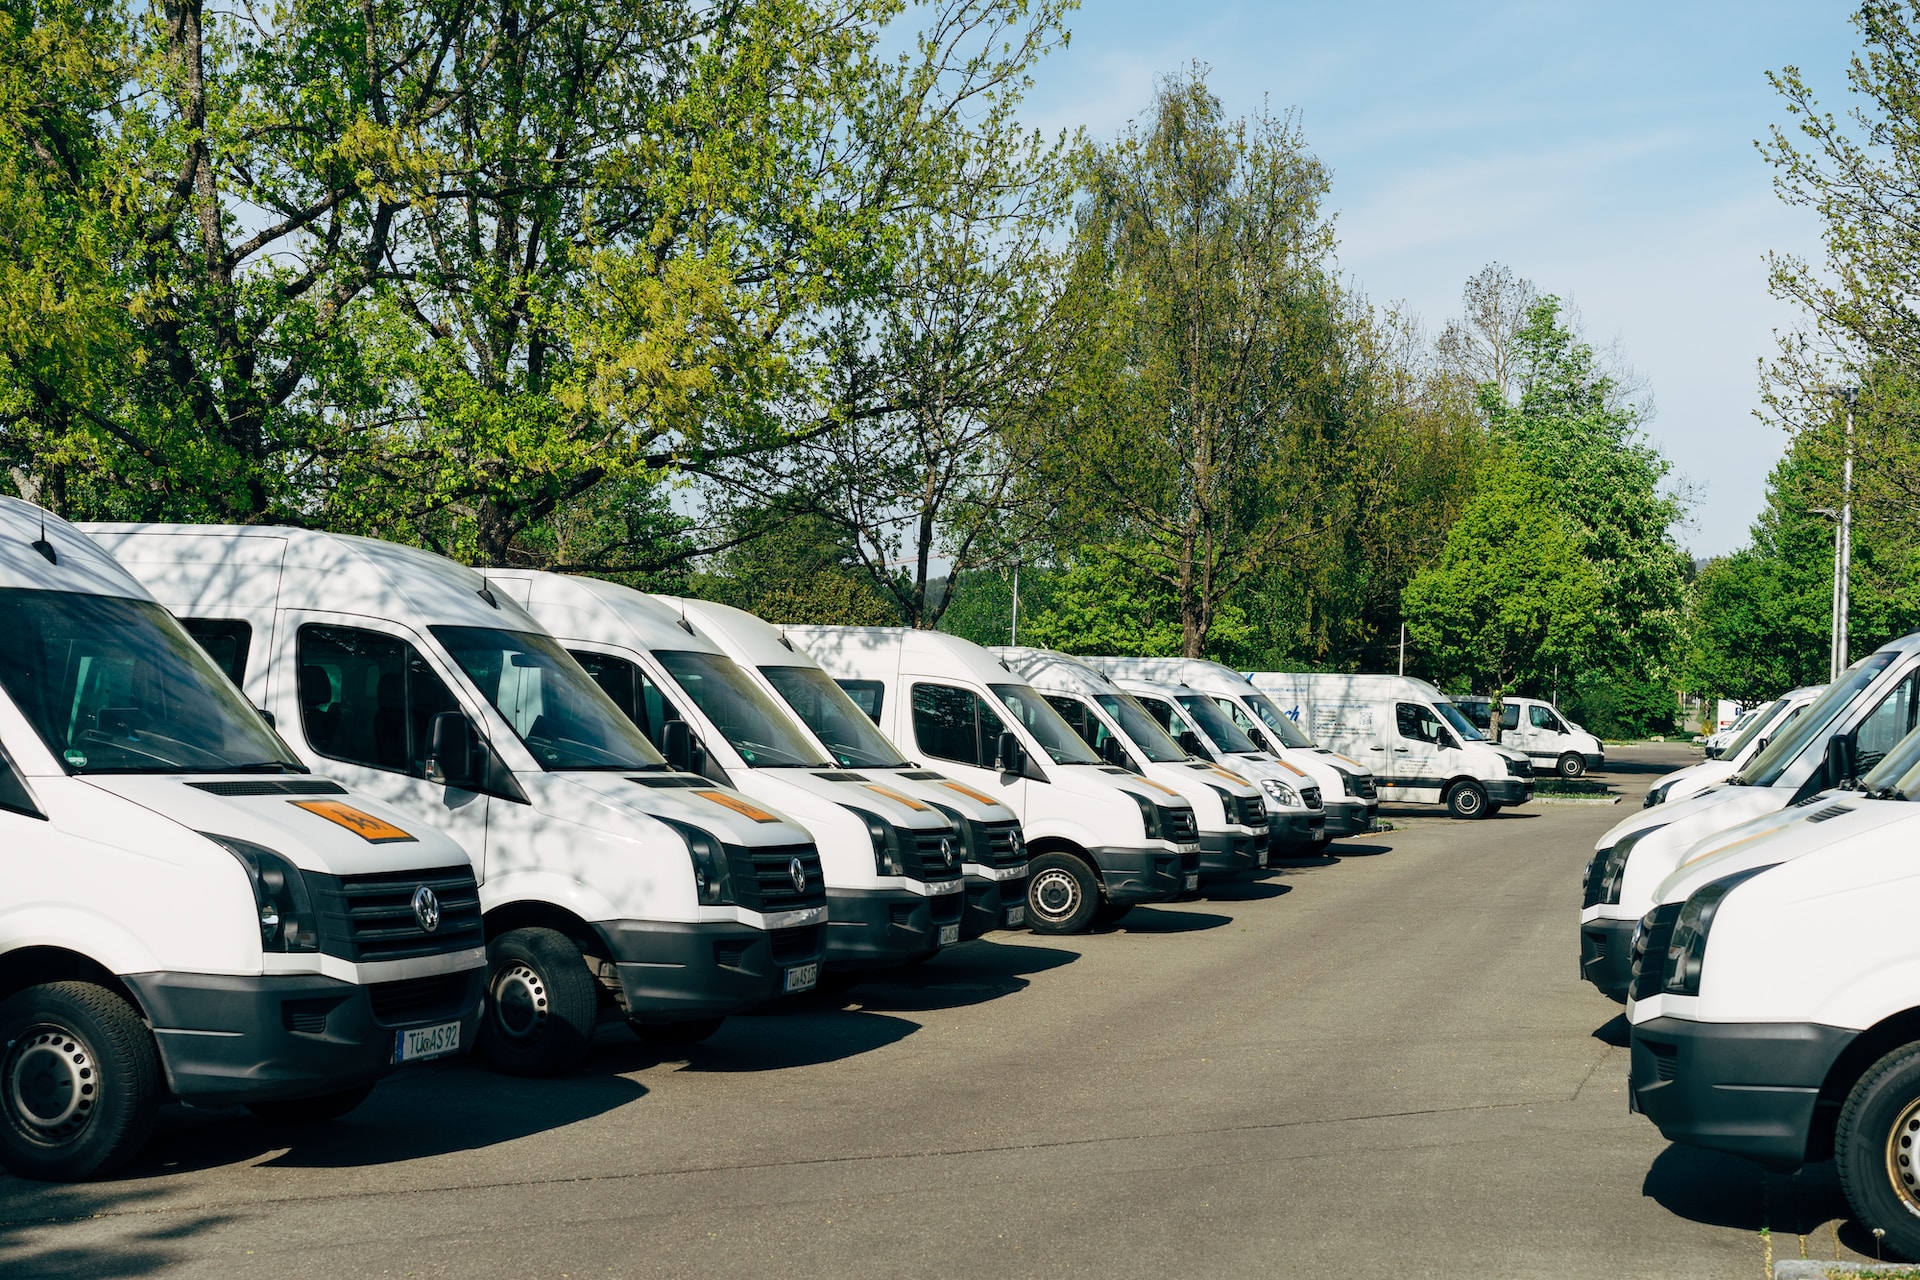 Fleet Shine: Elevate Your Brand with Immaculate Vehicle Fleets